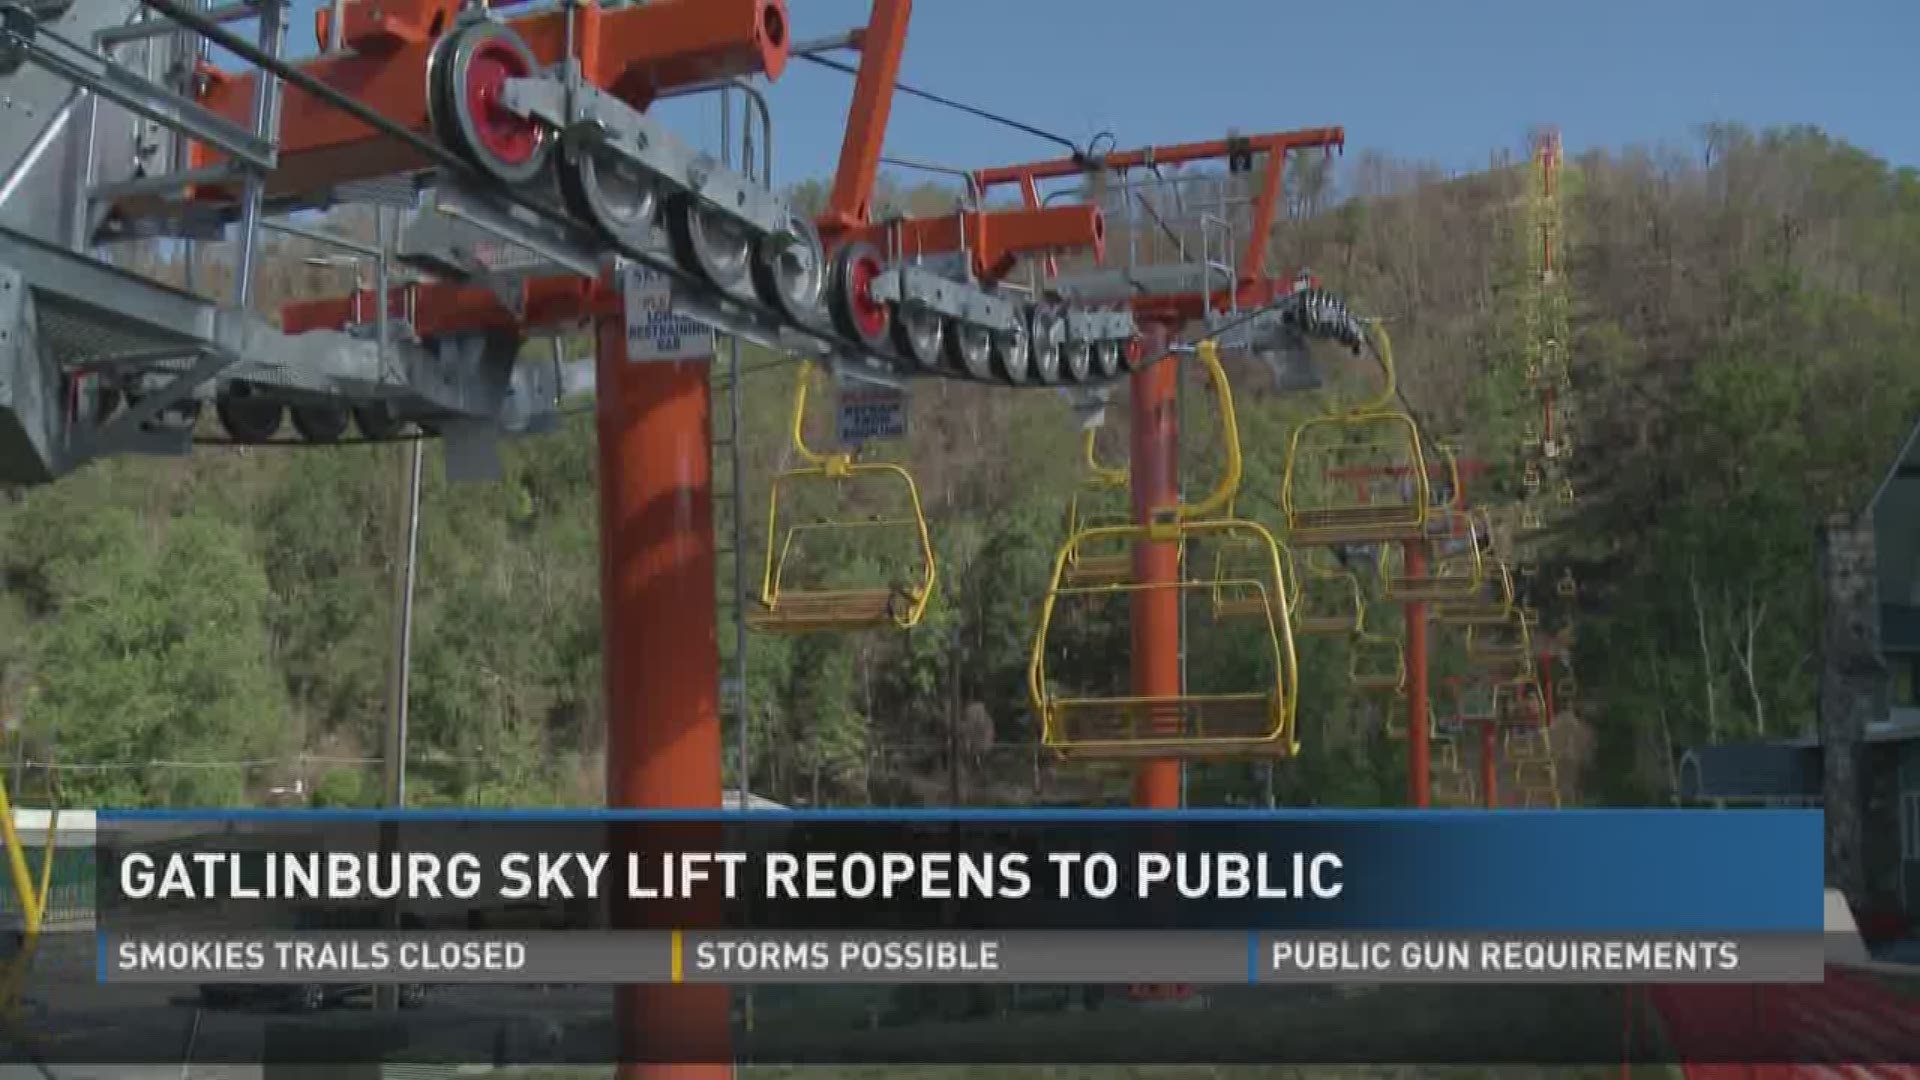 The Gatlinburg Skylift welcomes its first riders since the November 28th wildfires in Sevier County.